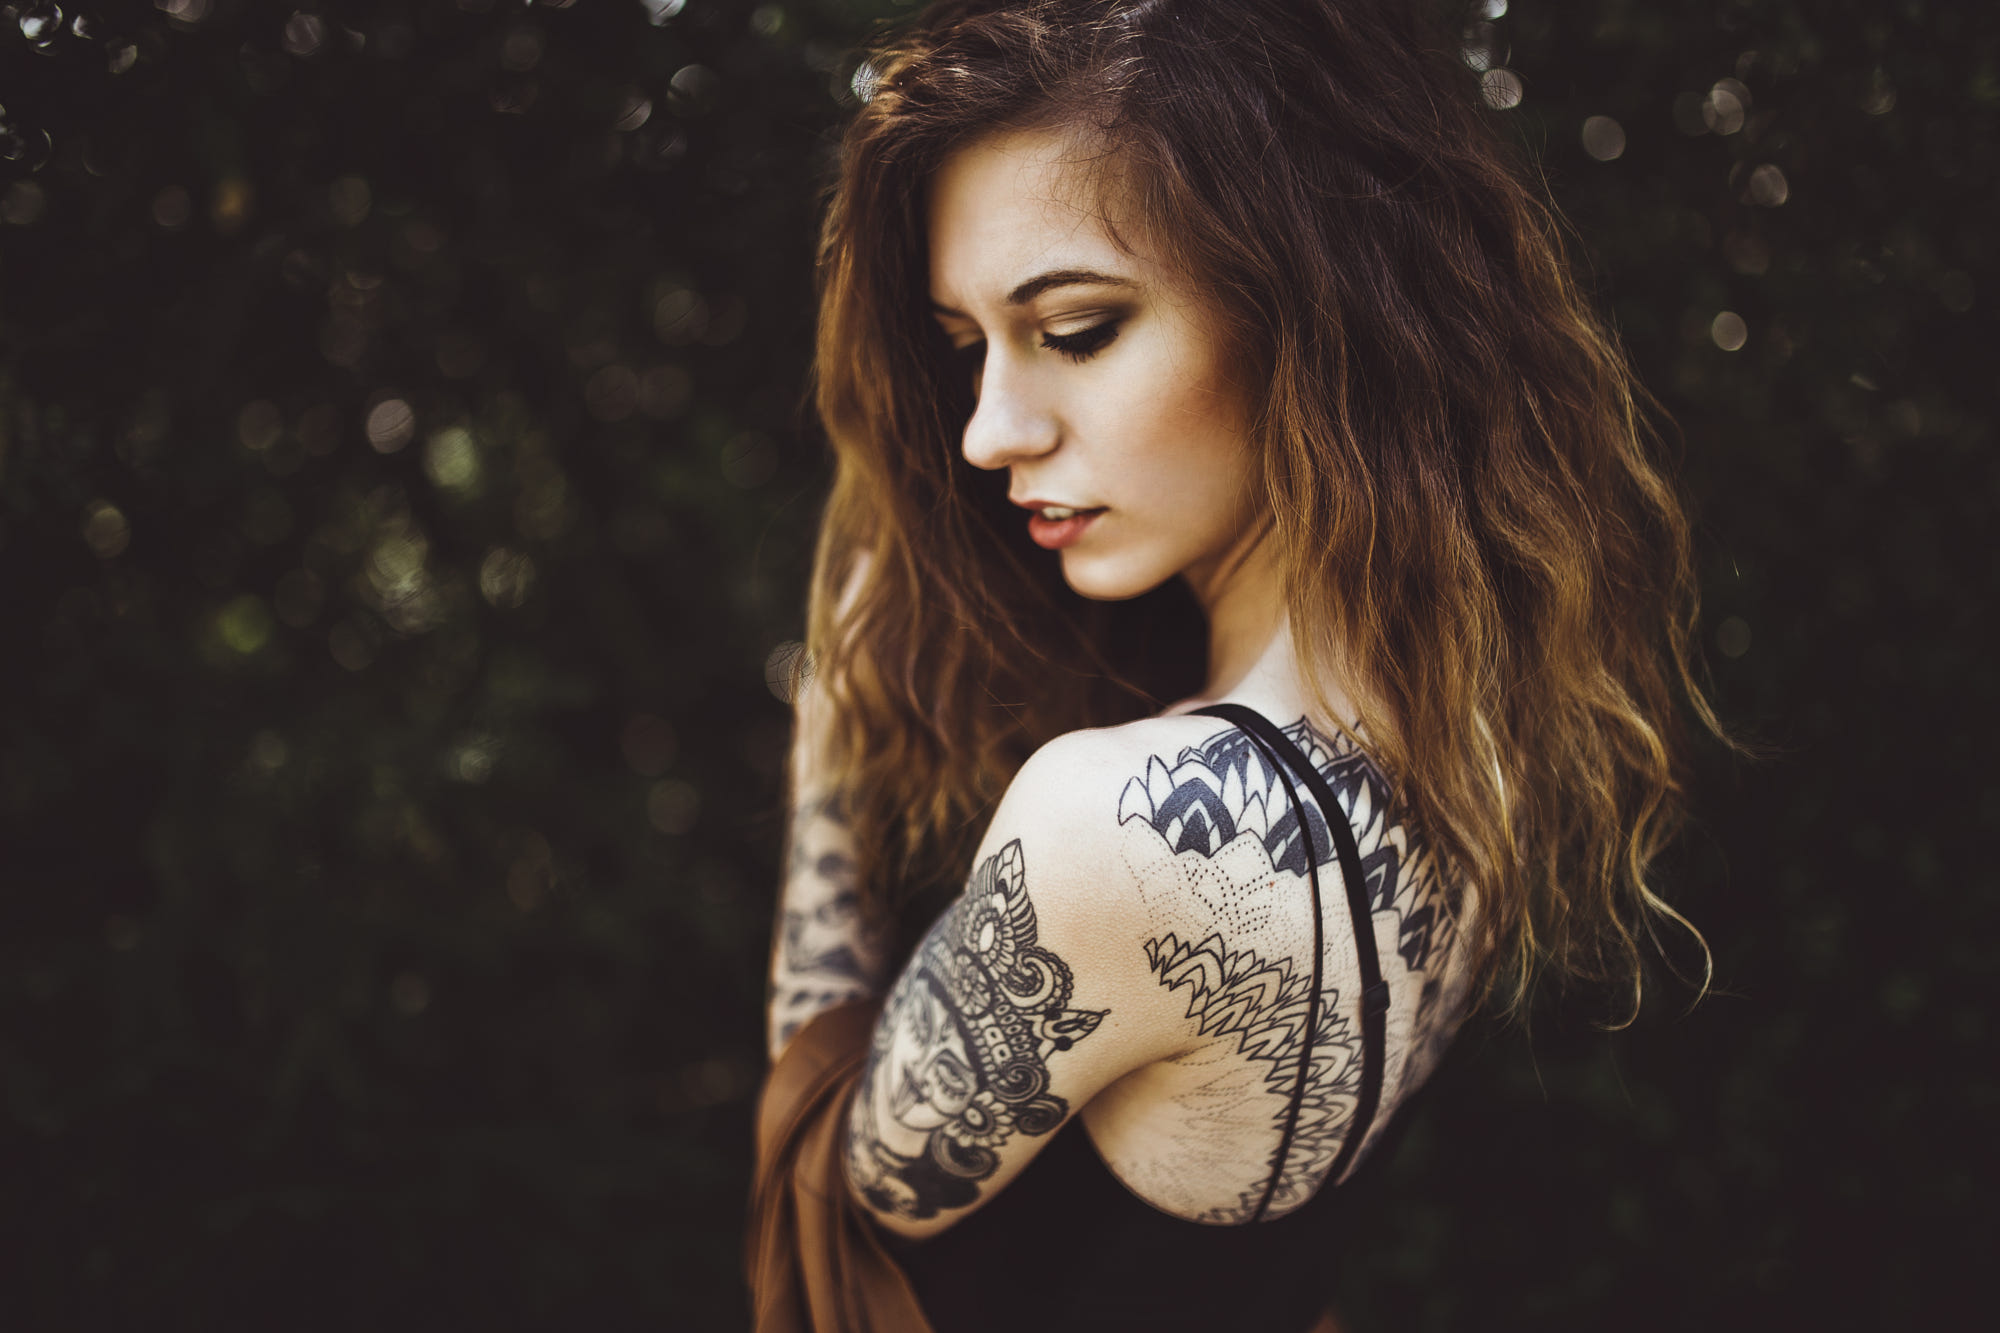 People 2000x1333 Heiko Klingele women women outdoors photography model forest trees black clothing depth of field brunette dyed hair open mouth back tank top tattoo hand(s) in hair bare shoulders sensual gaze